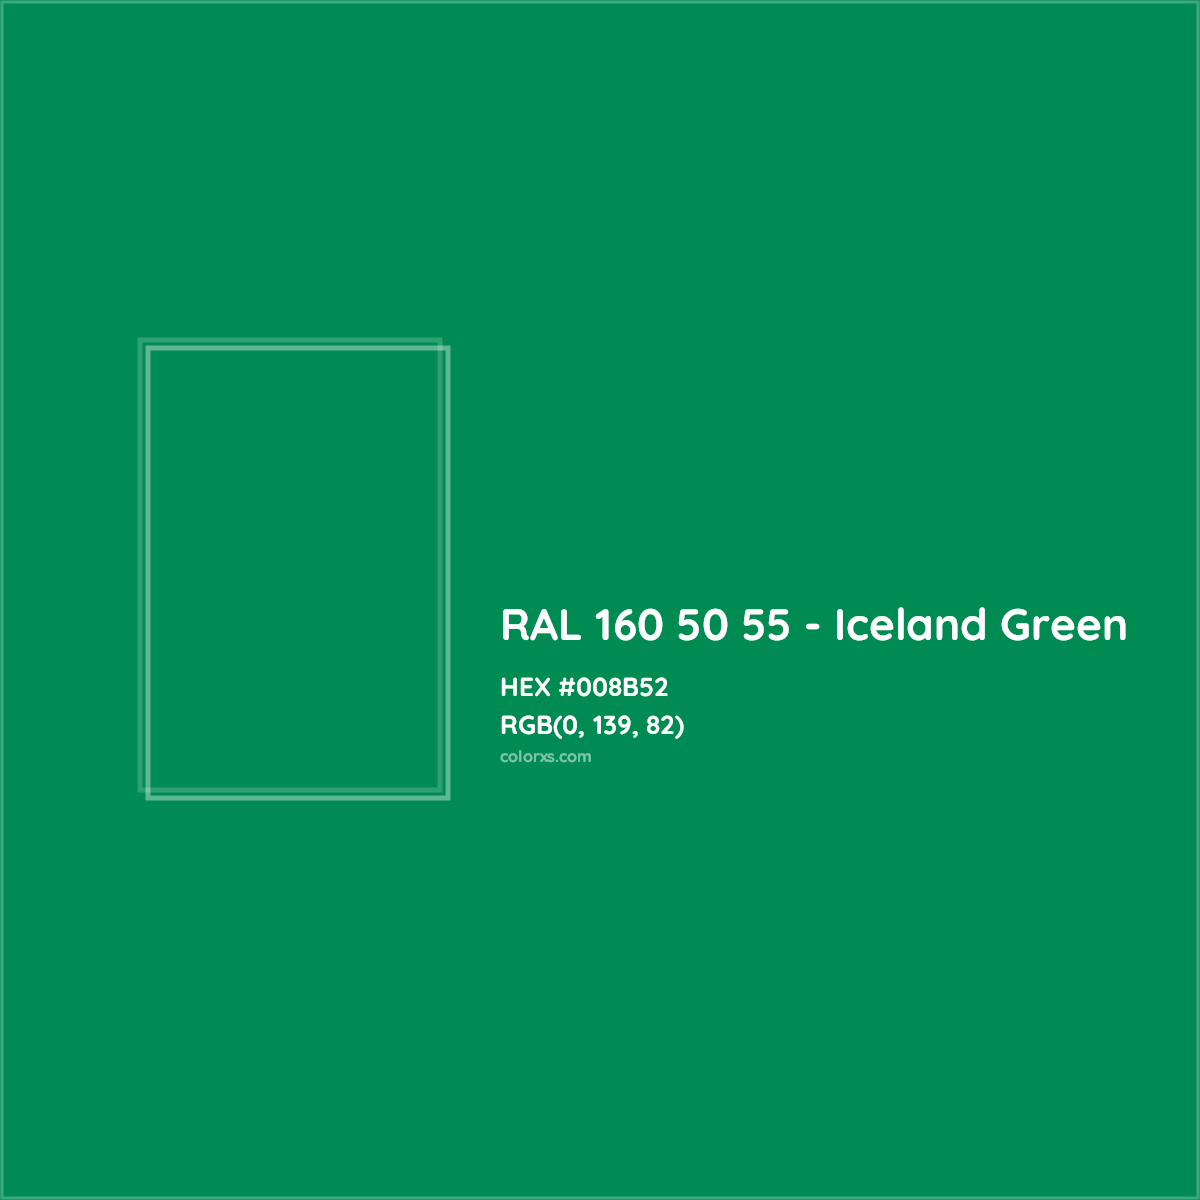 HEX #008B52 RAL 160 50 55 - Iceland Green CMS RAL Design - Color Code